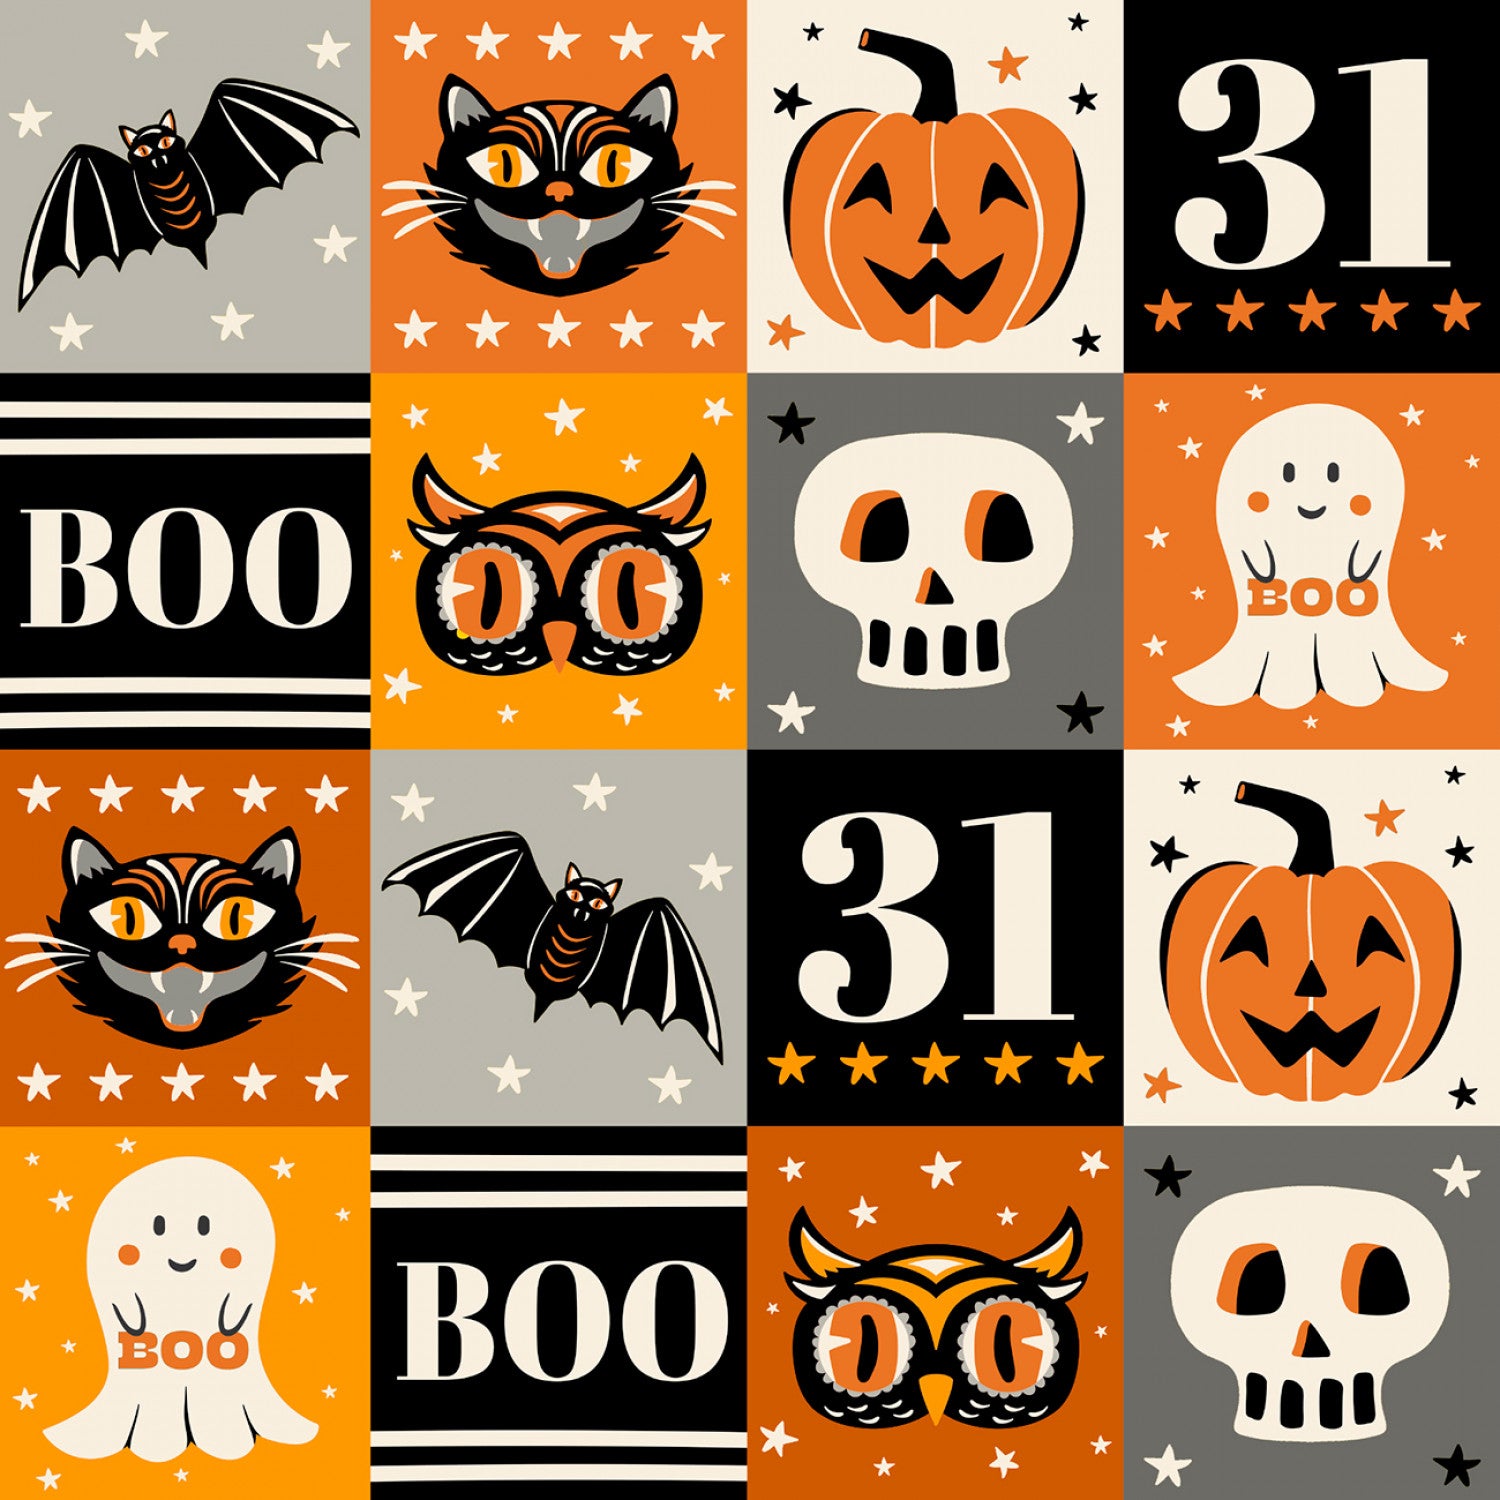 Witching Hour | 5" Charm Pack by Heather Dutton for P&B Textiles | 42pcs